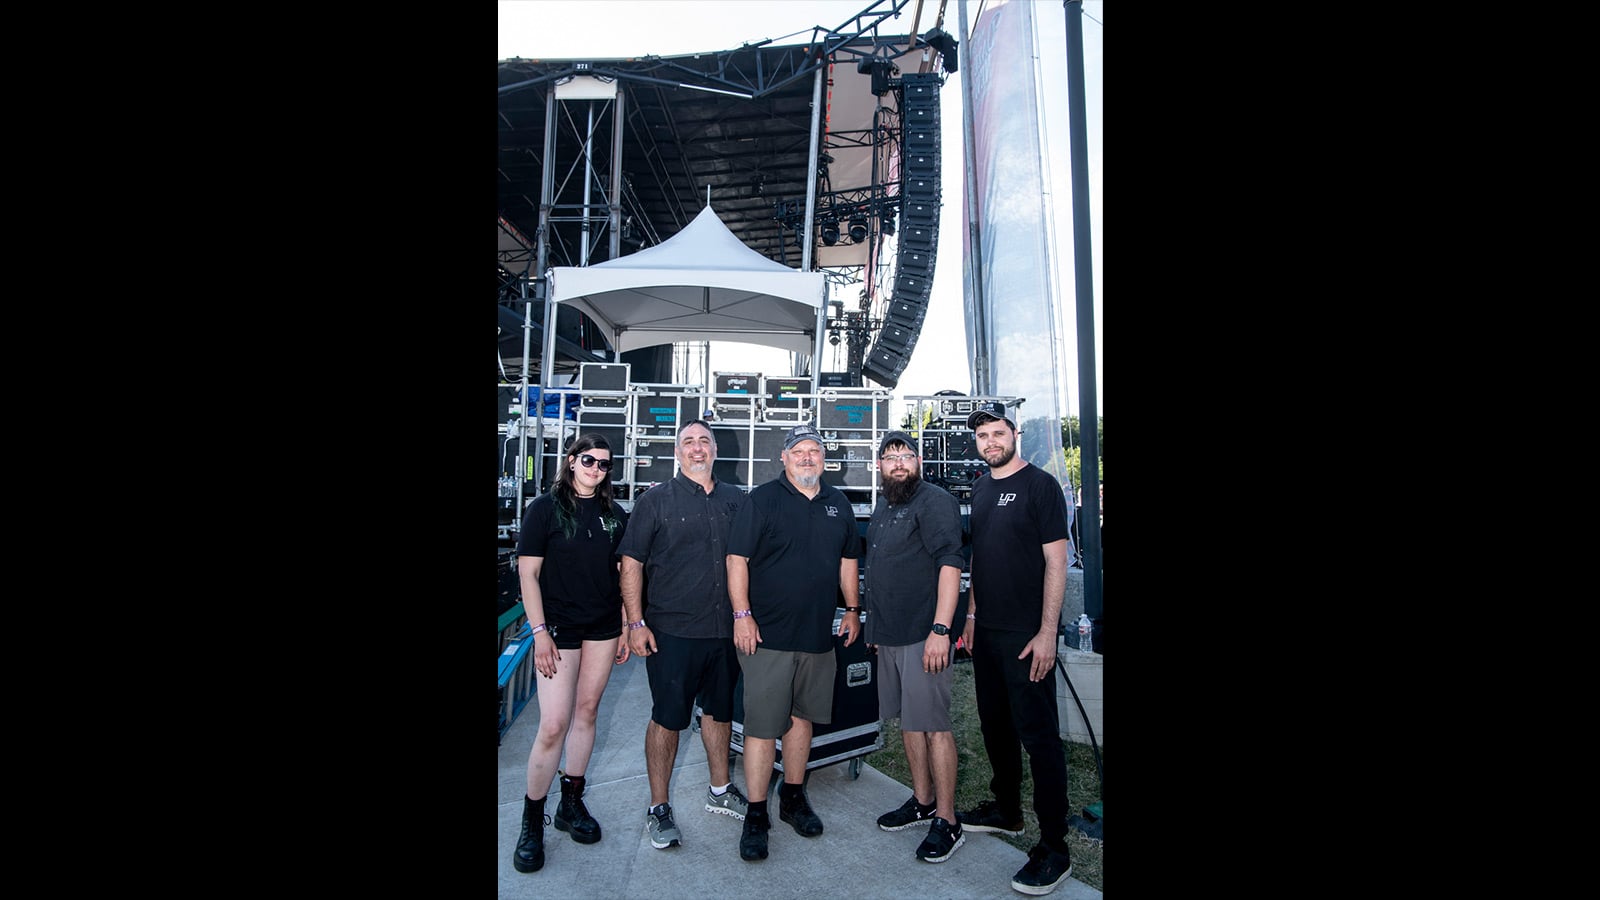 (L-R) Carolyn Slothour, House FOH Engineer; Chris Lambert, Owner/A1; Perry Comeaux, Monitor Engineer; Brandon Abshire, Crew Chief/Patch; Michael Lawrence, Systems Engineer